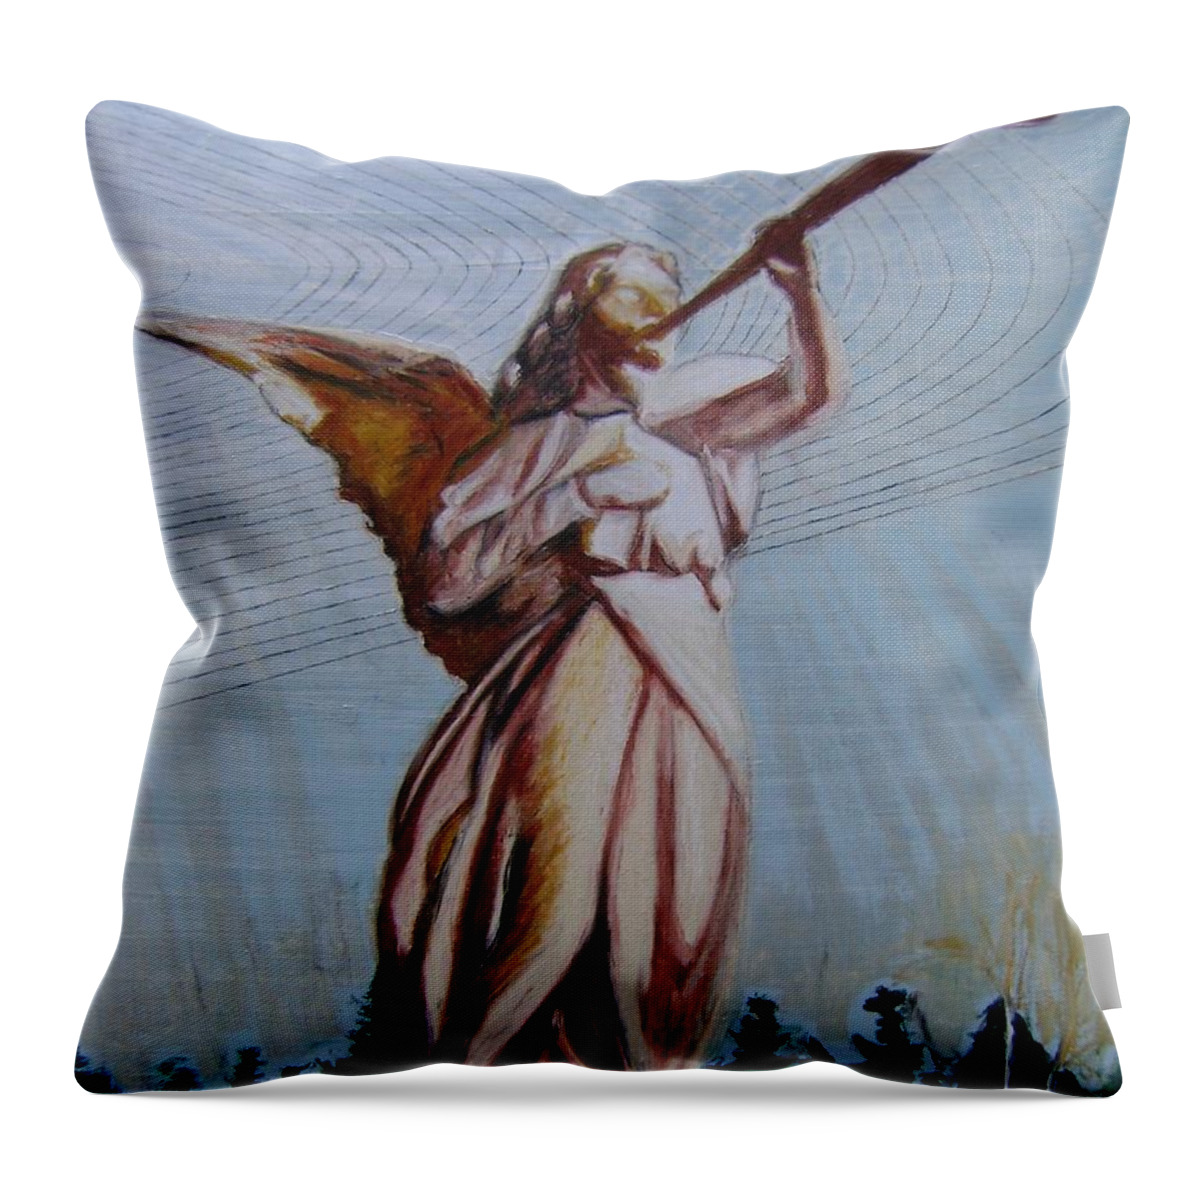 Raise Your Vibration Aka L'ange De Bertrand Throw Pillow featuring the painting Raise your vibration aka L'Ange de Bertrand by Therese Legere